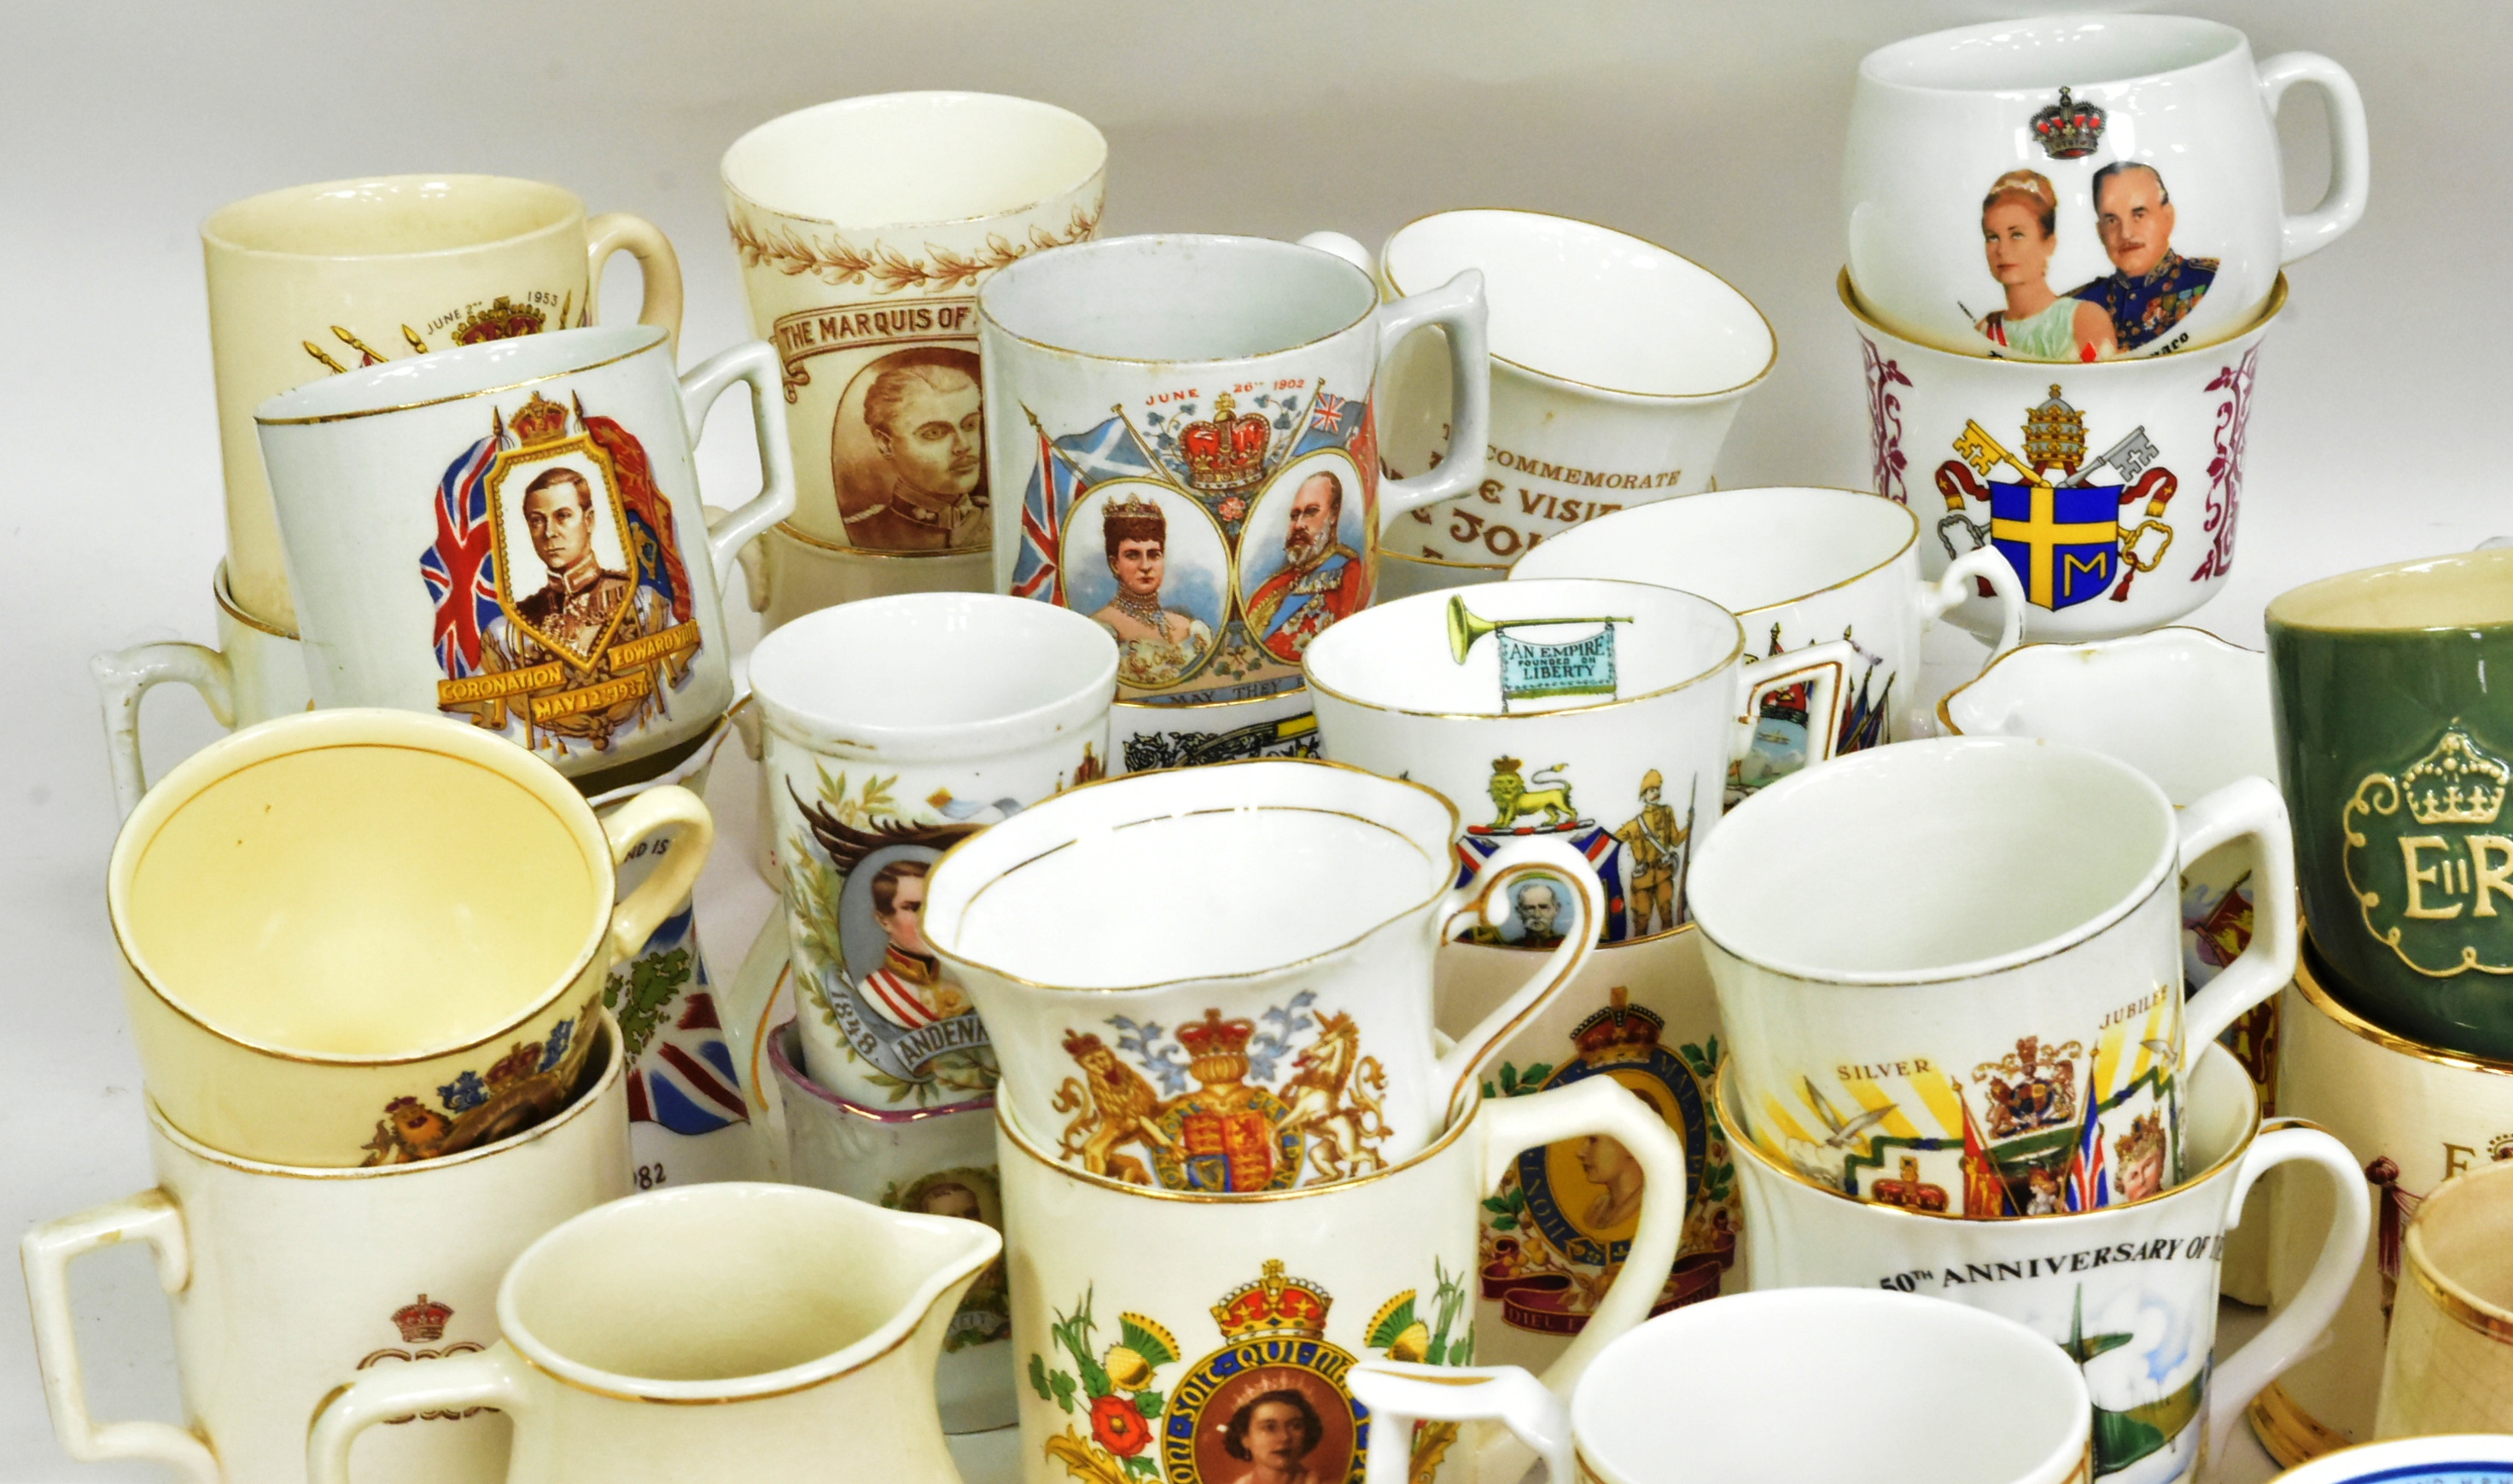 LARGE COLLECTION OF ROYAL COMMEMORATIVE MUGS & PLATES - Image 2 of 5